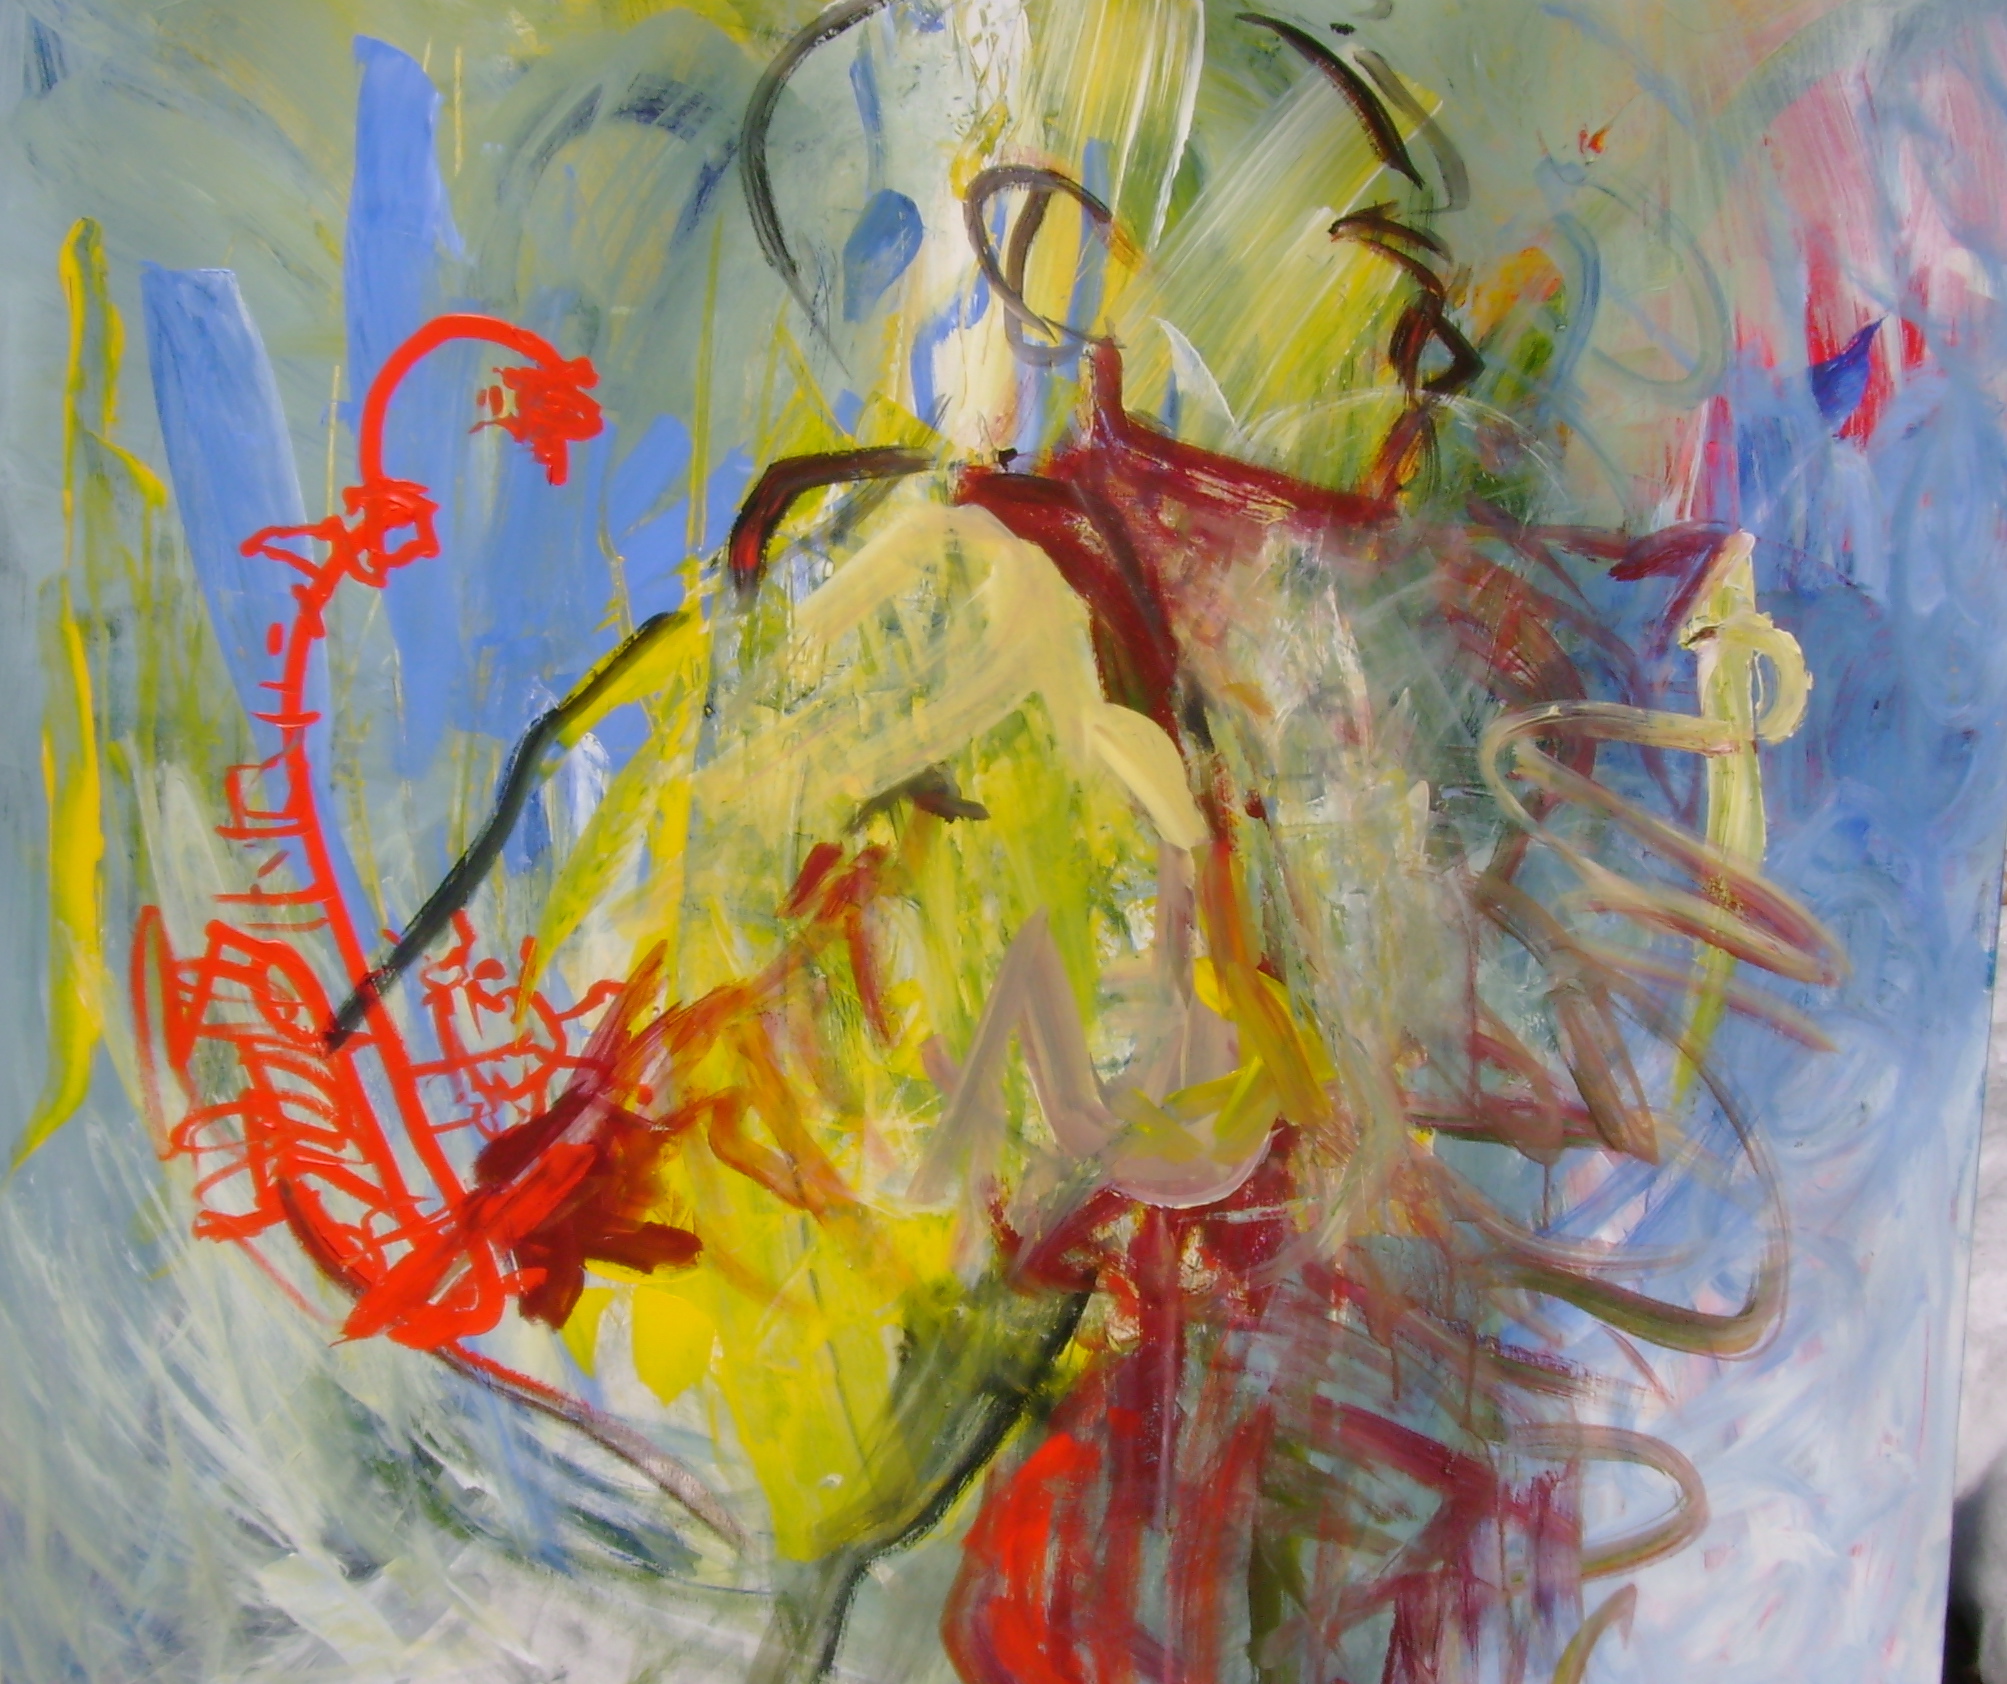 "She Sings" A Figurative Abstract